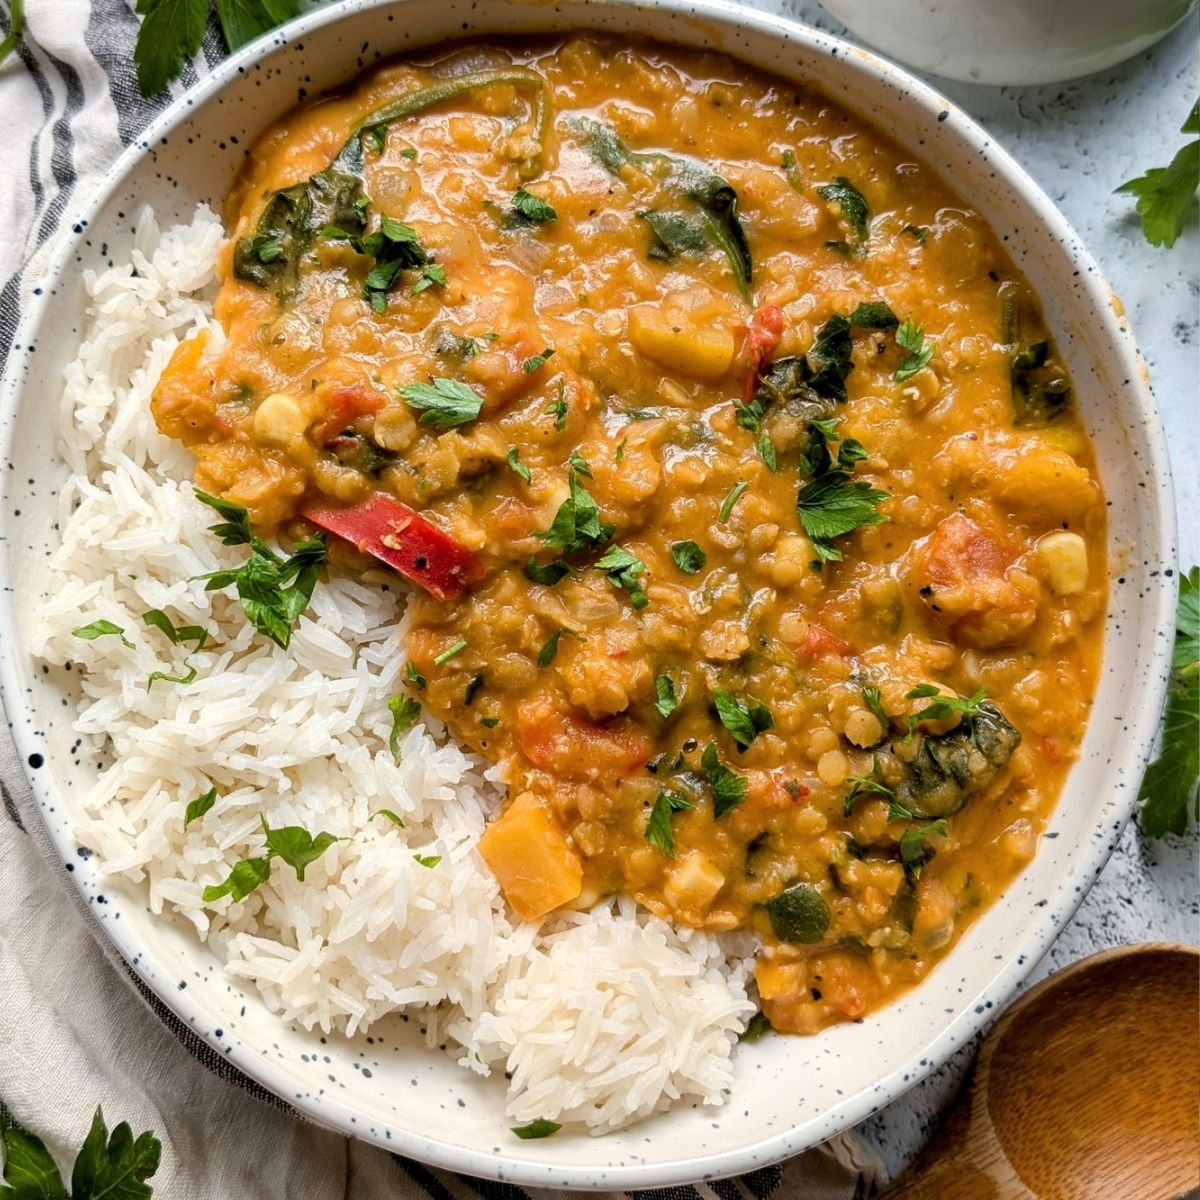 butternut squash red lentil dahl recipe vegan gluten free dairy free dal recipe red lentil and squash indian recipes healthy plant based high protein indian food.